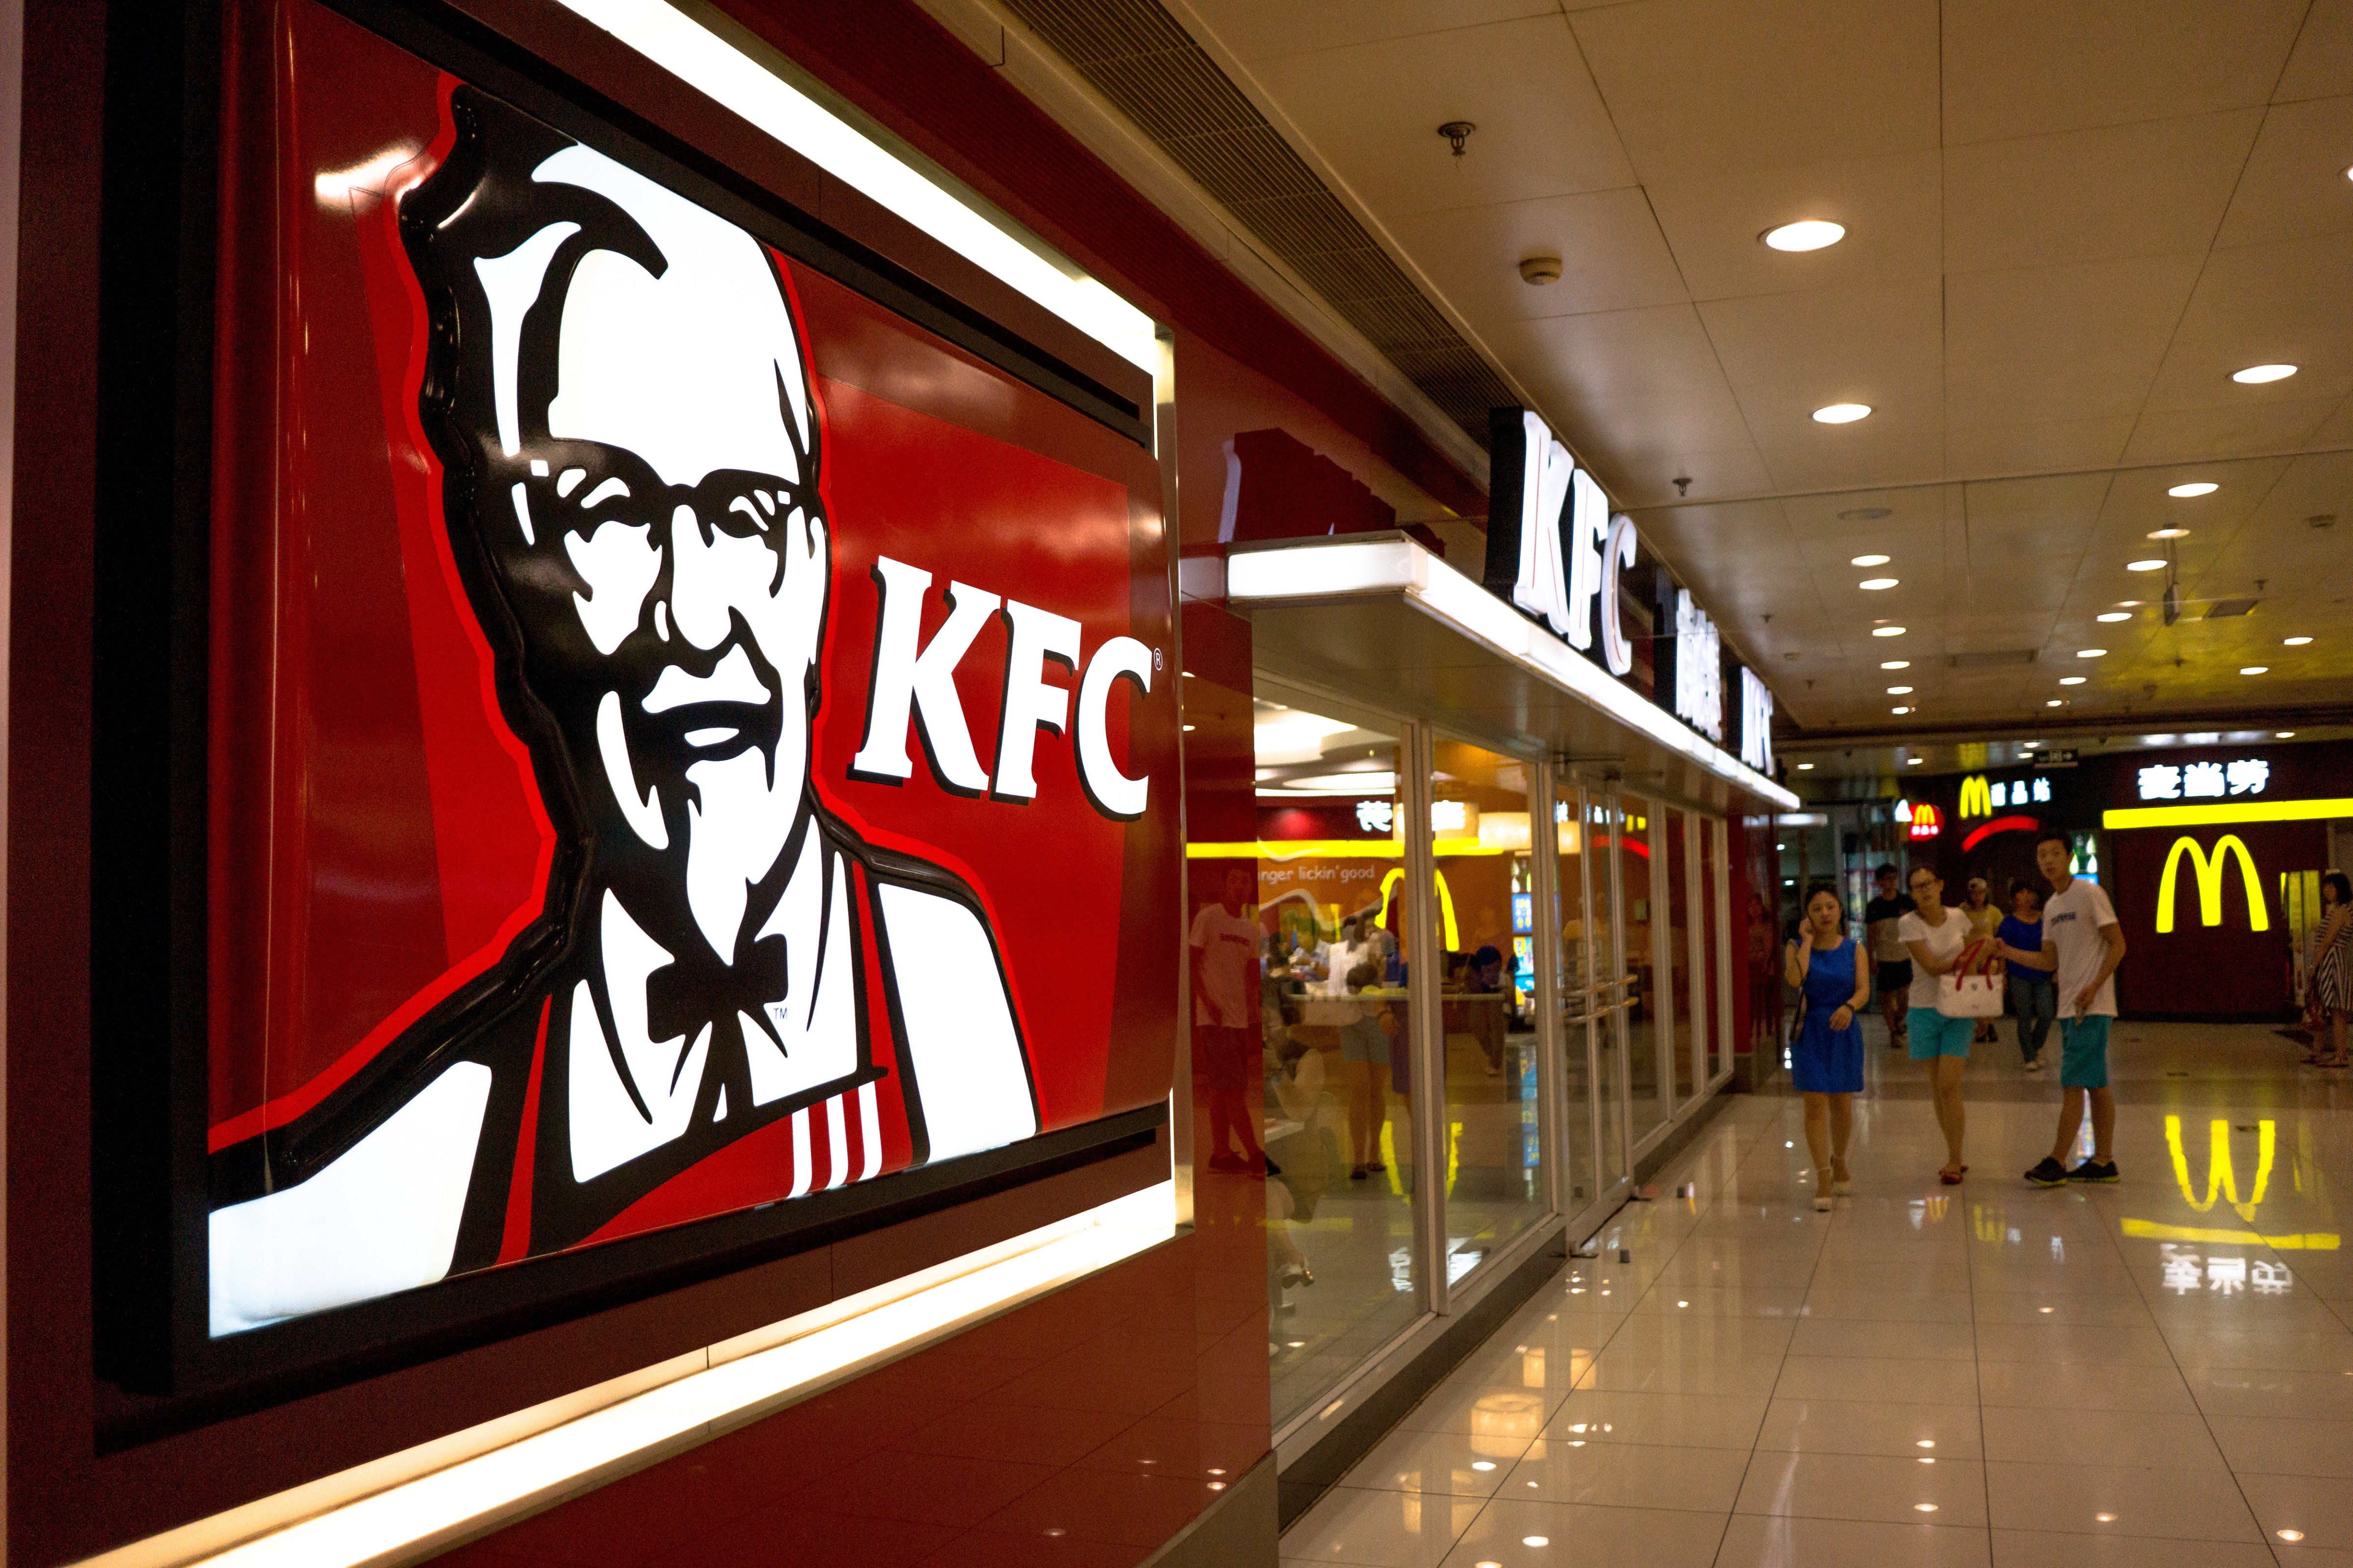 A KFC restaurant in a shopping mall in China. (Zhang Peng&mdash;LightRocket via Getty Images)